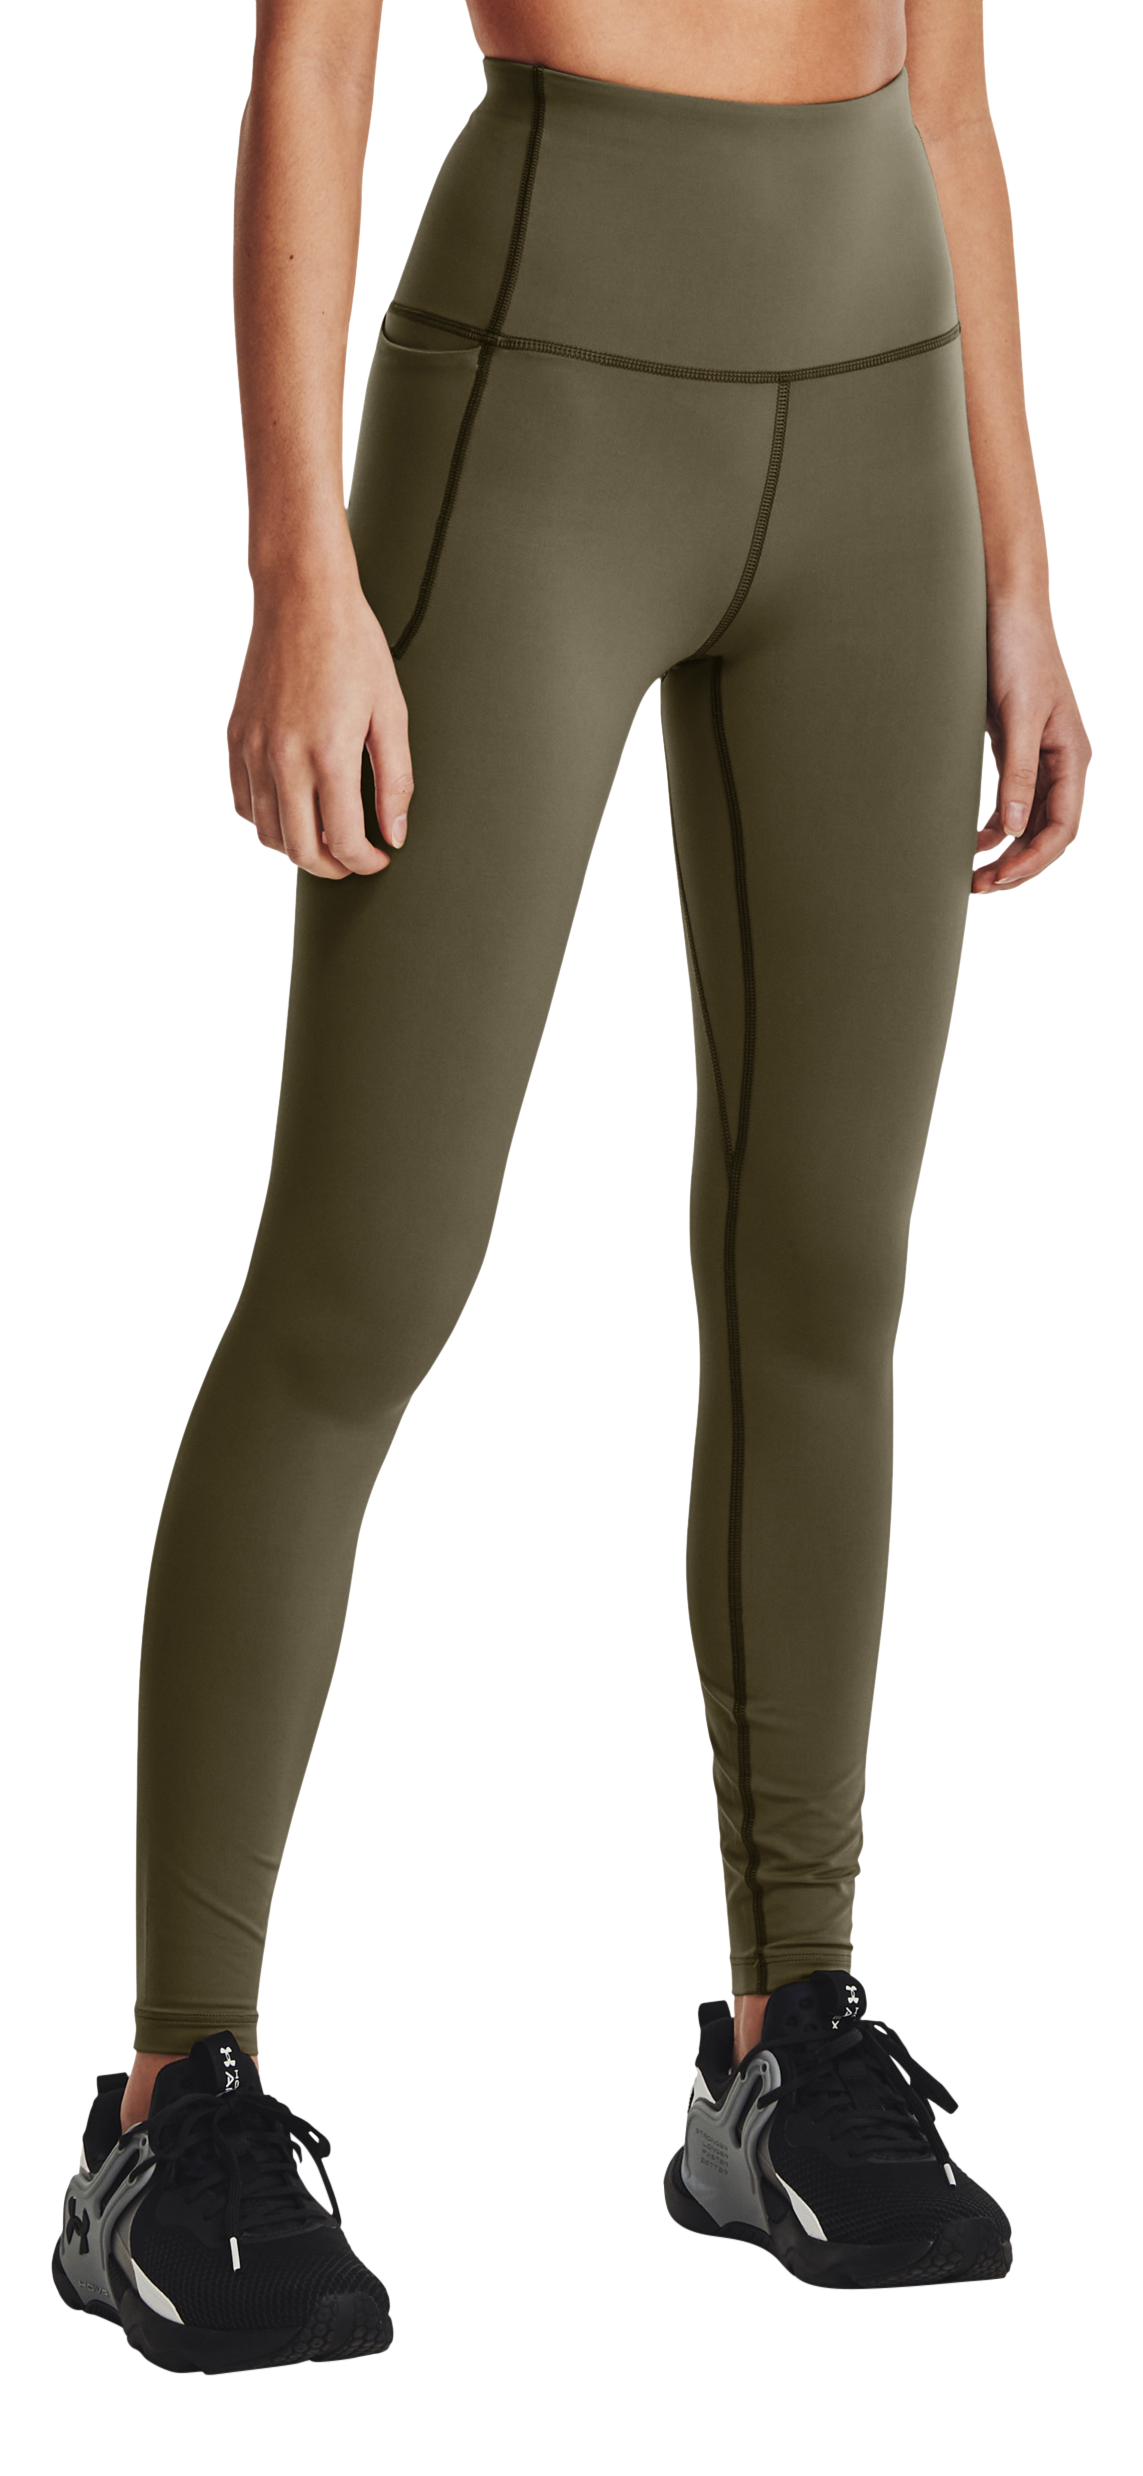 Under Armour Meridian Ultra High Rise Leggings for Ladies - Tent/Metallic Silver - XXL